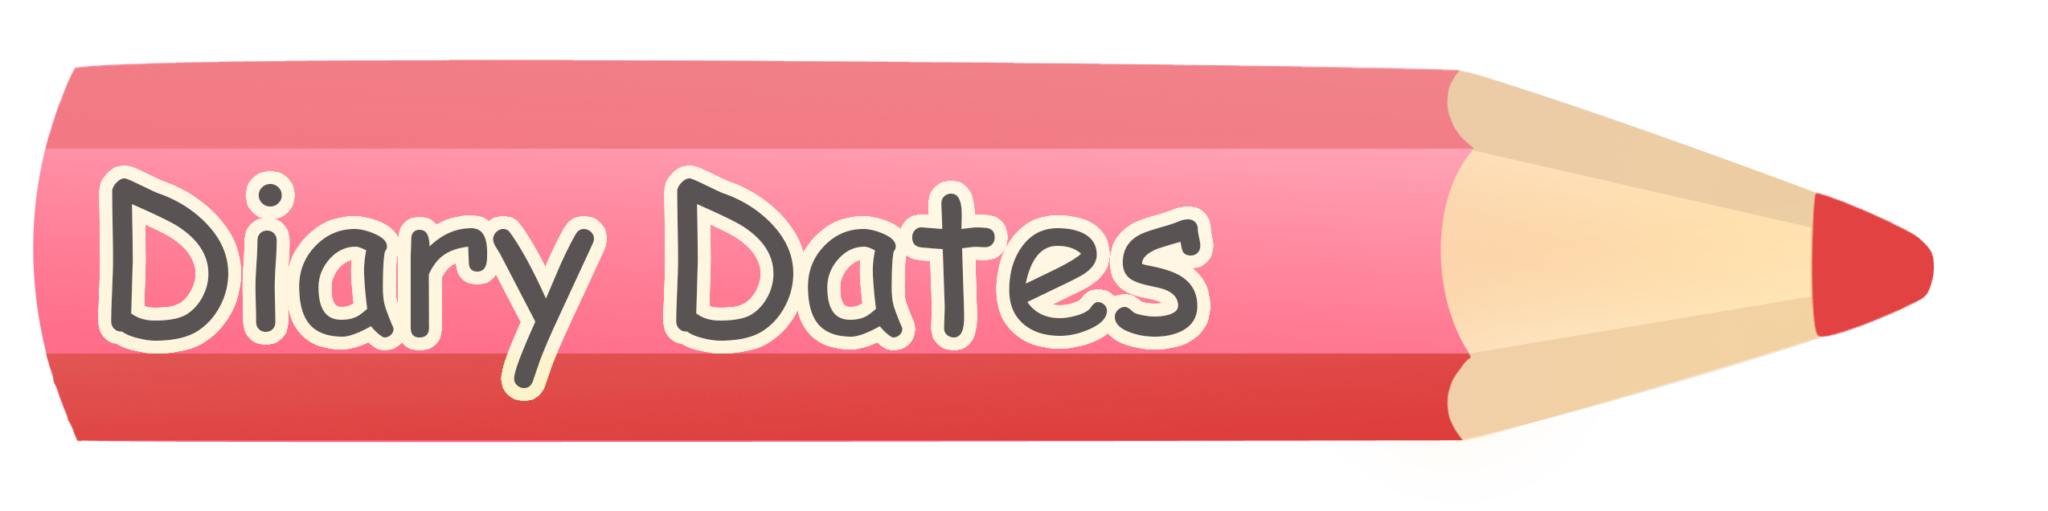 diary dates – Orchard Brae School